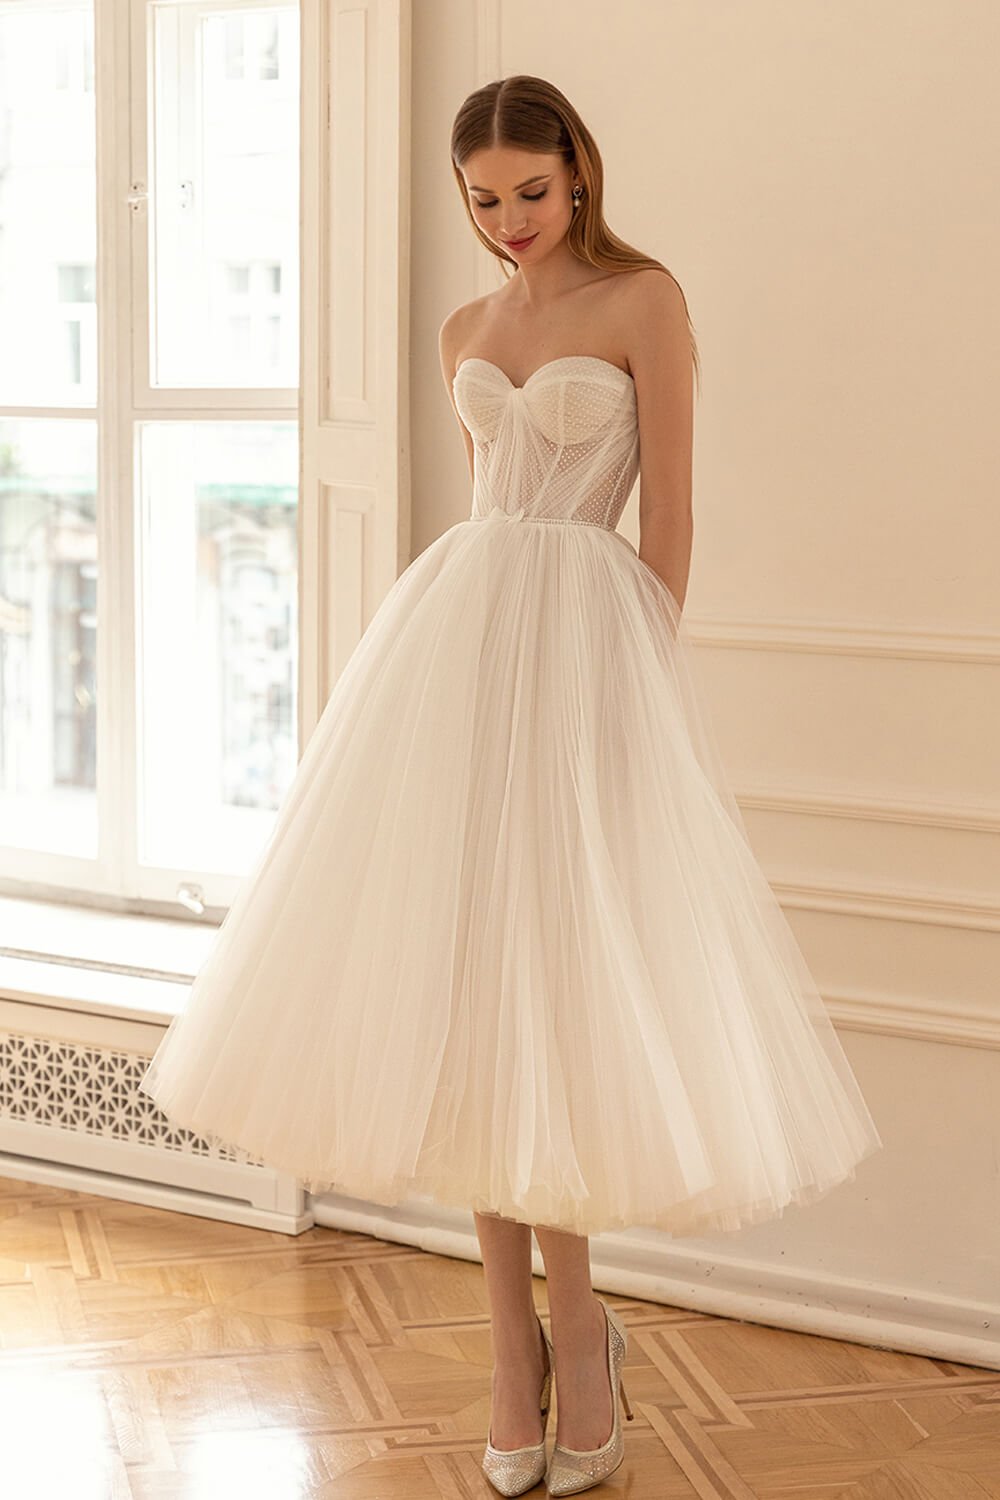 Short Wedding Dresses - When to Wear it and How! - Esposa